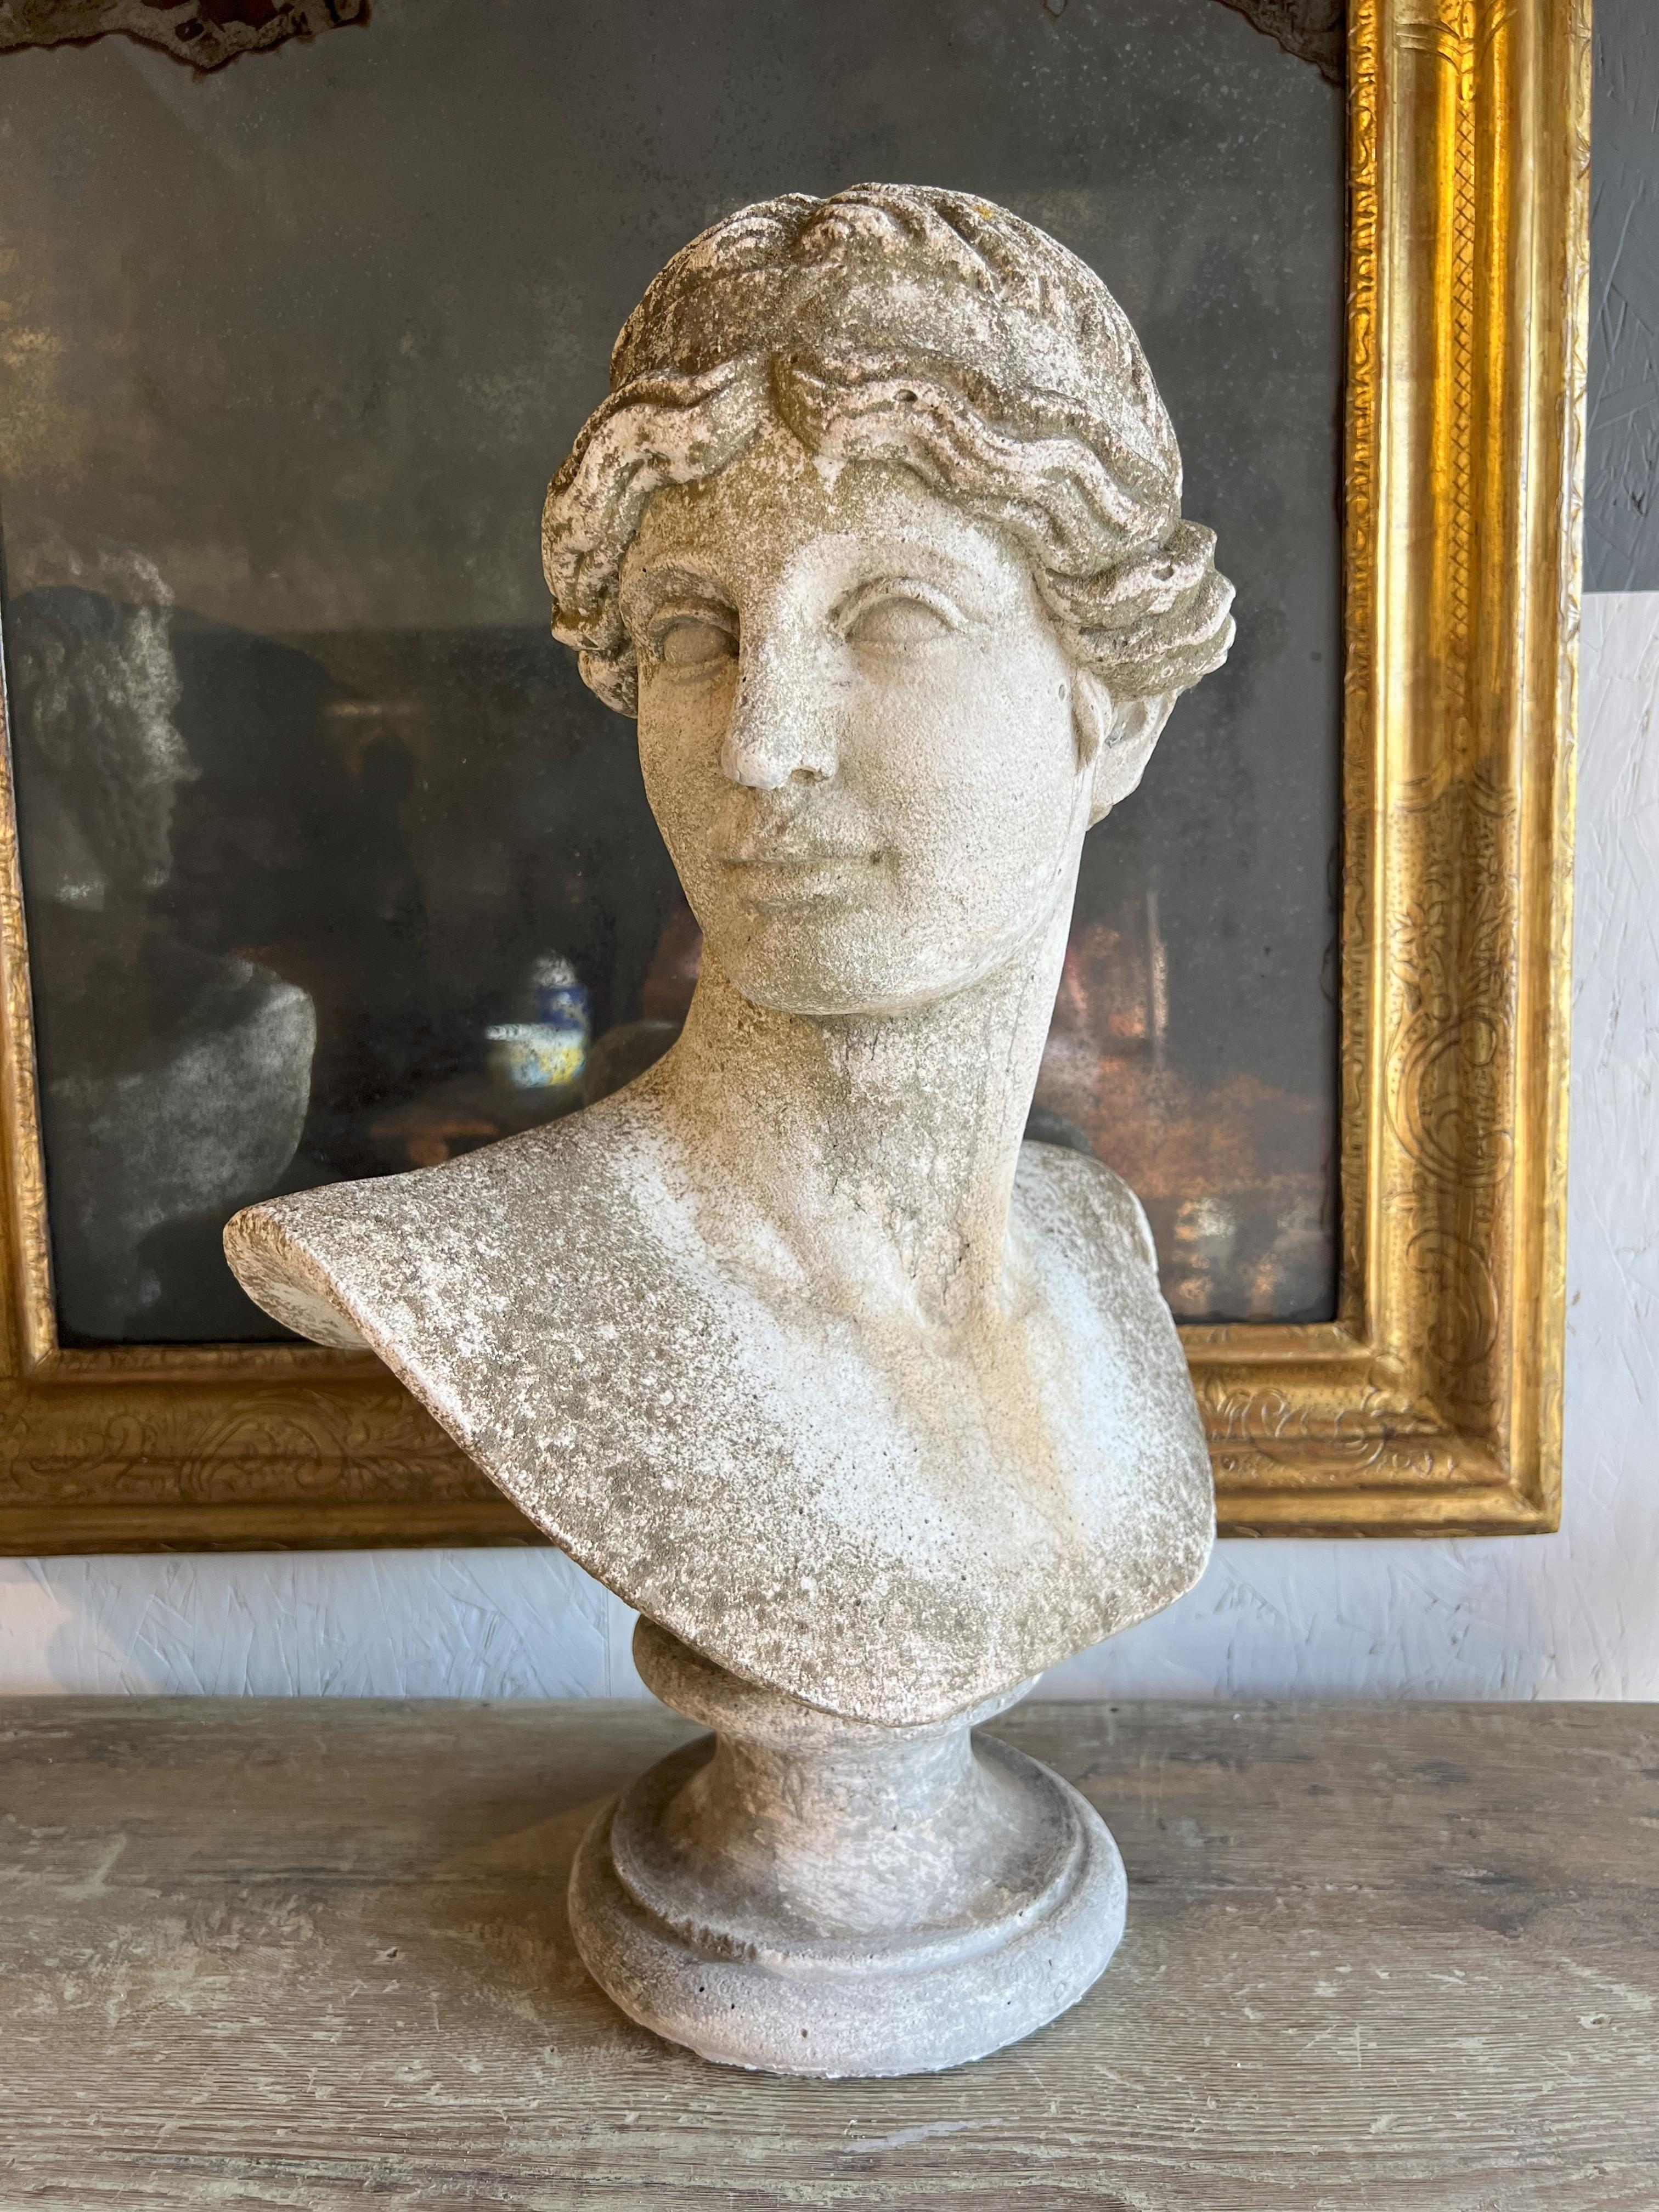 This bust is a Late 19th century carved stone bust made of 